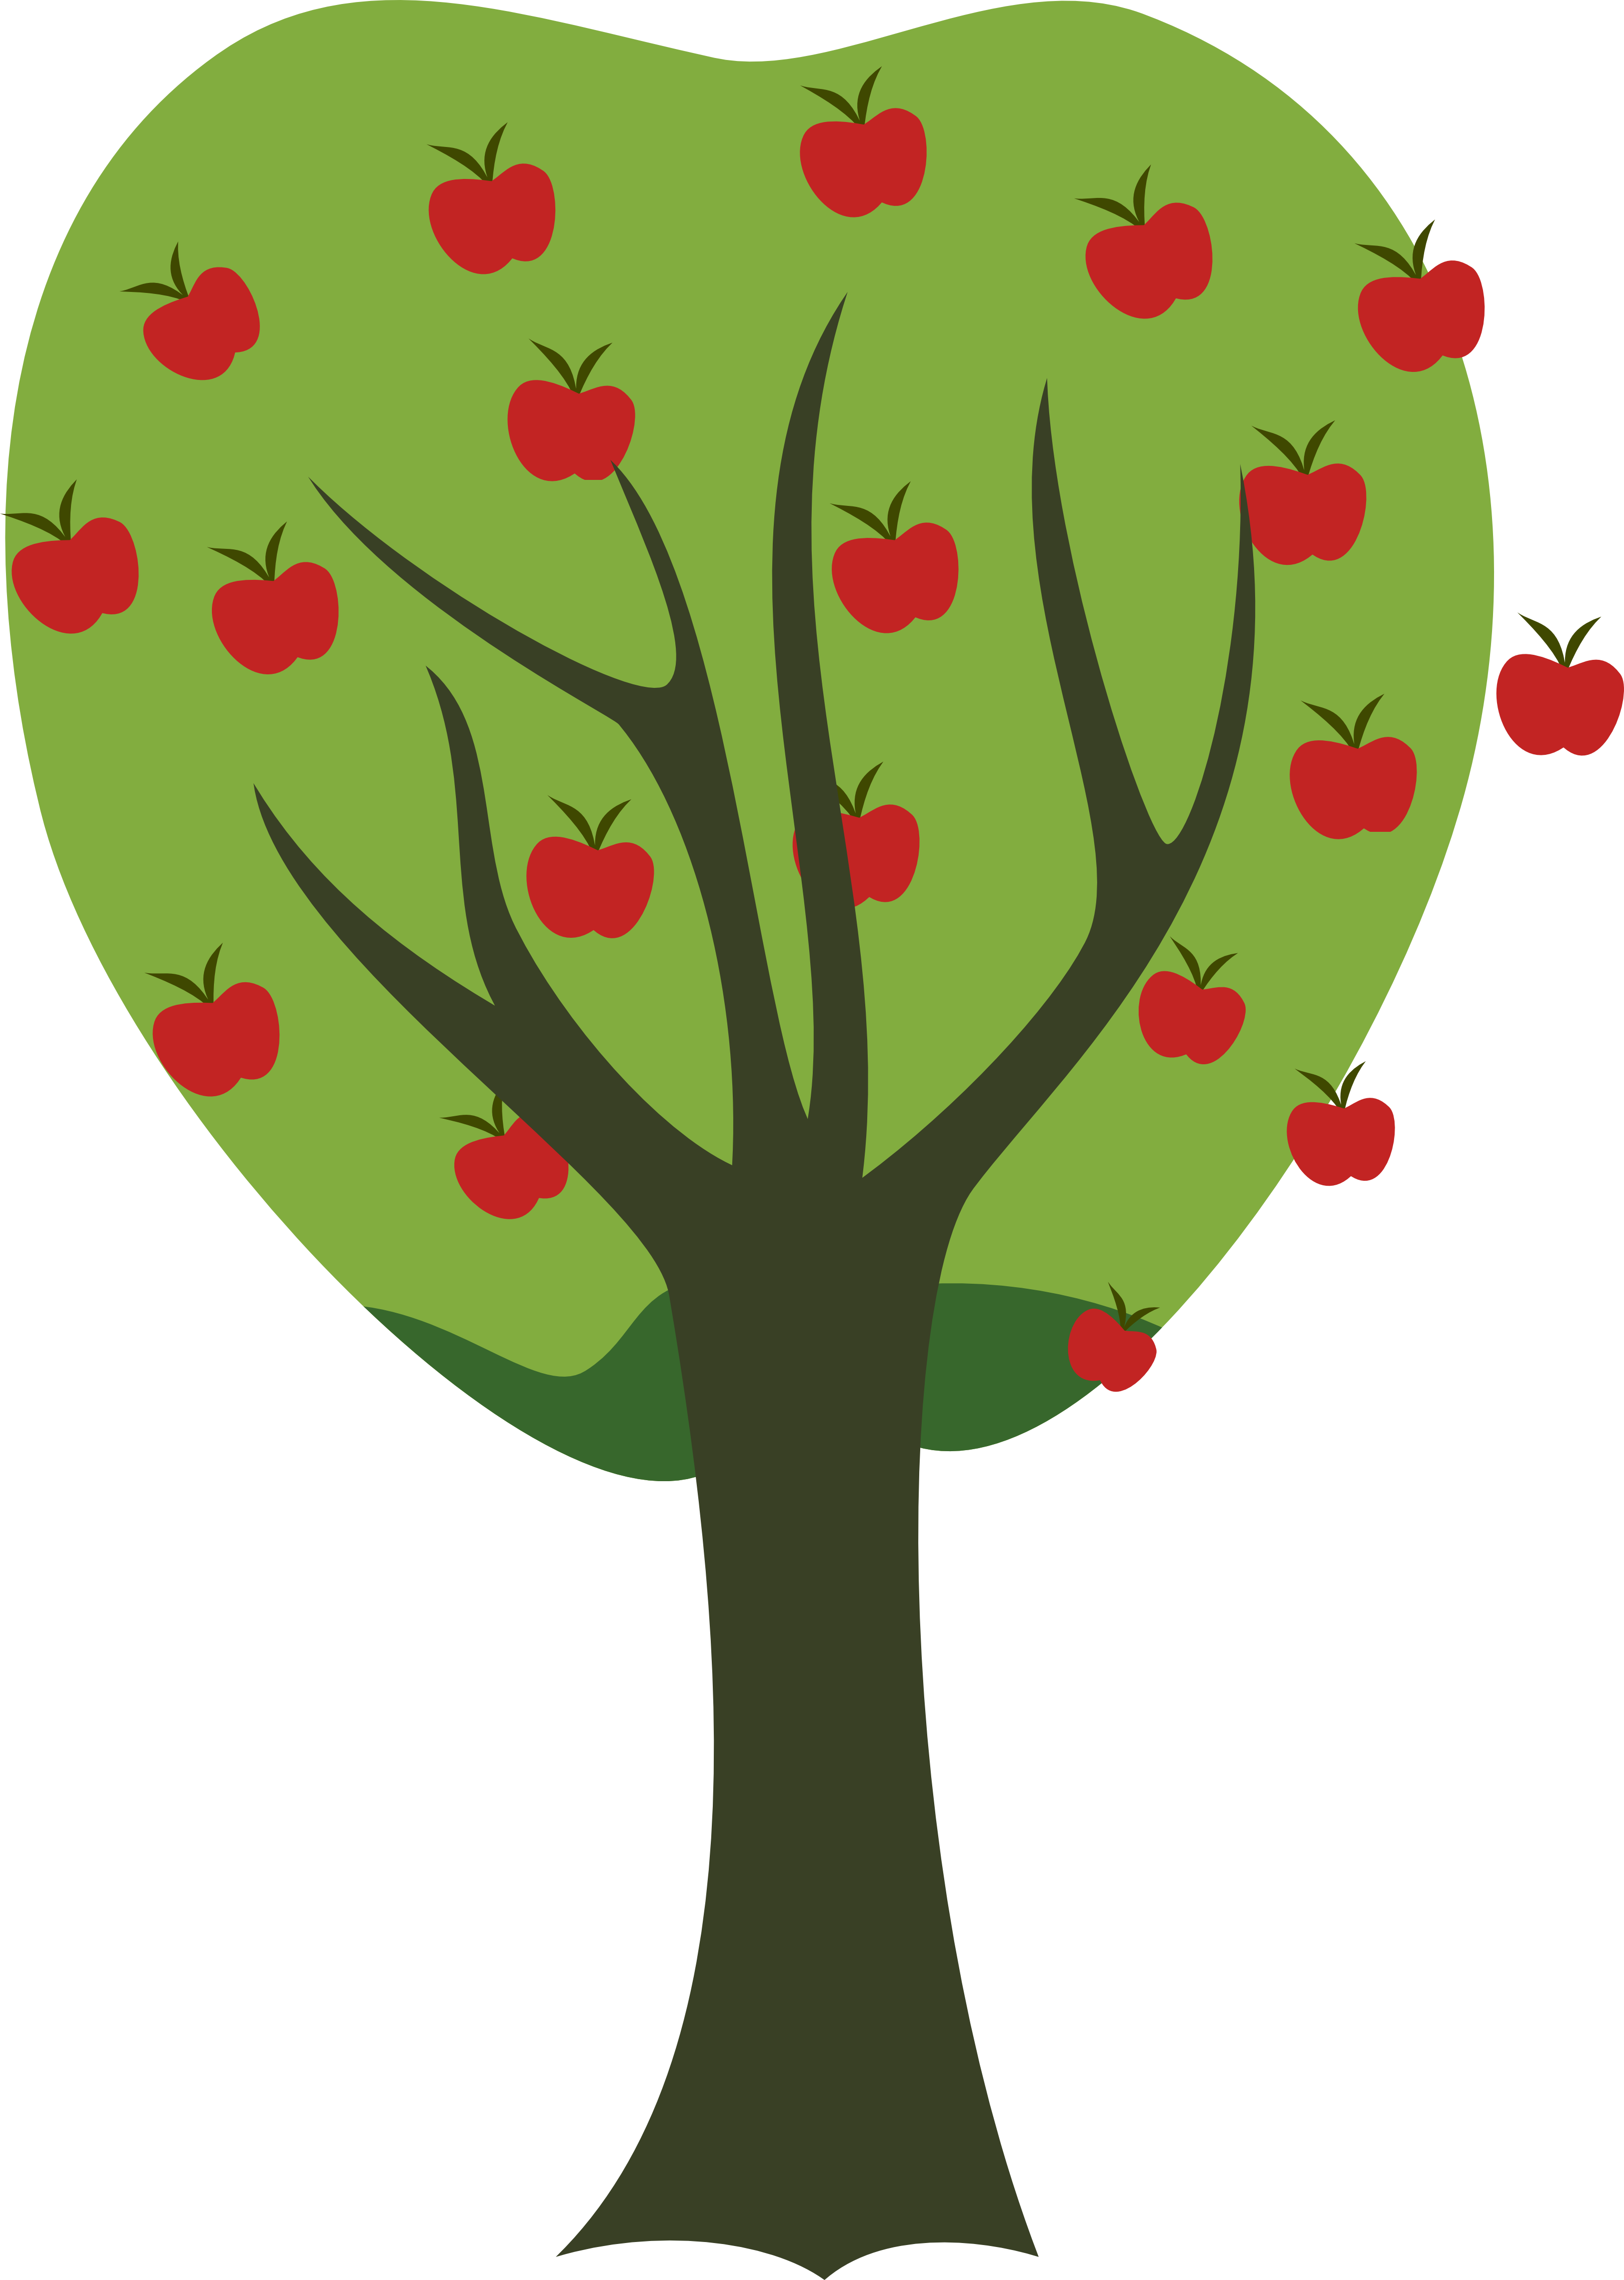 Apple Tree 1 by Catnipfairy on Clipart library